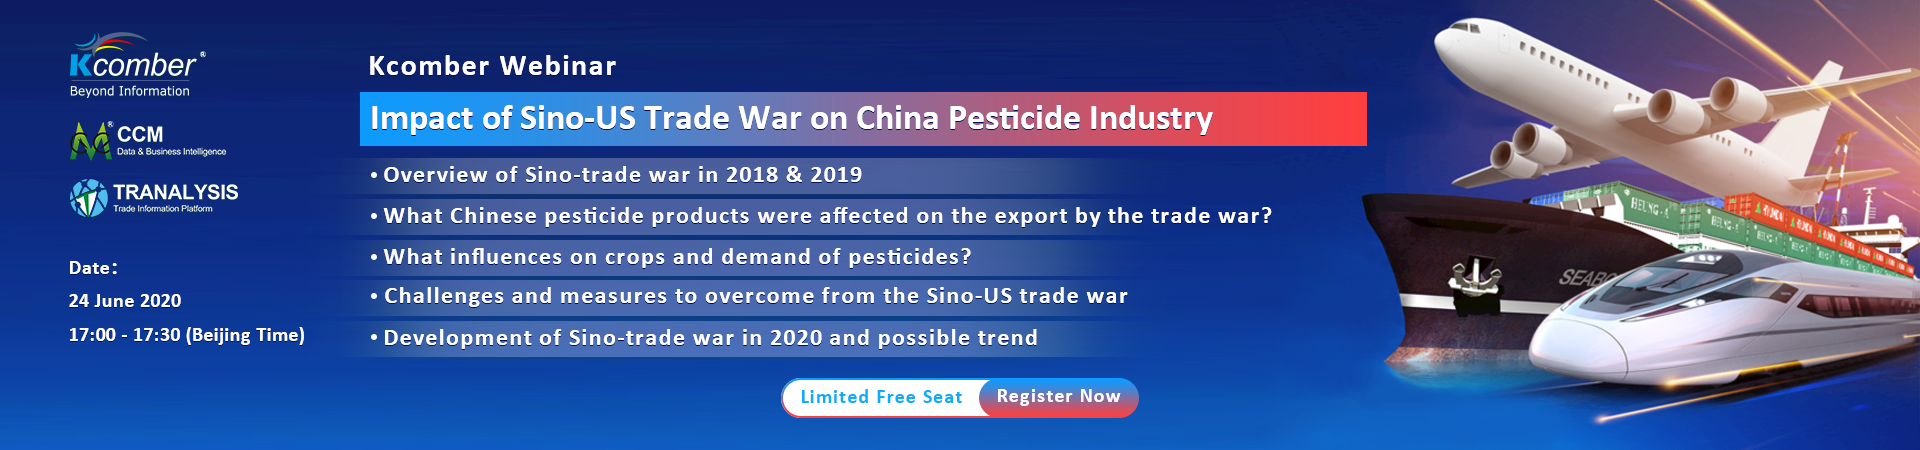 Impact of Sino-US Trade War on China Pesticide Industry